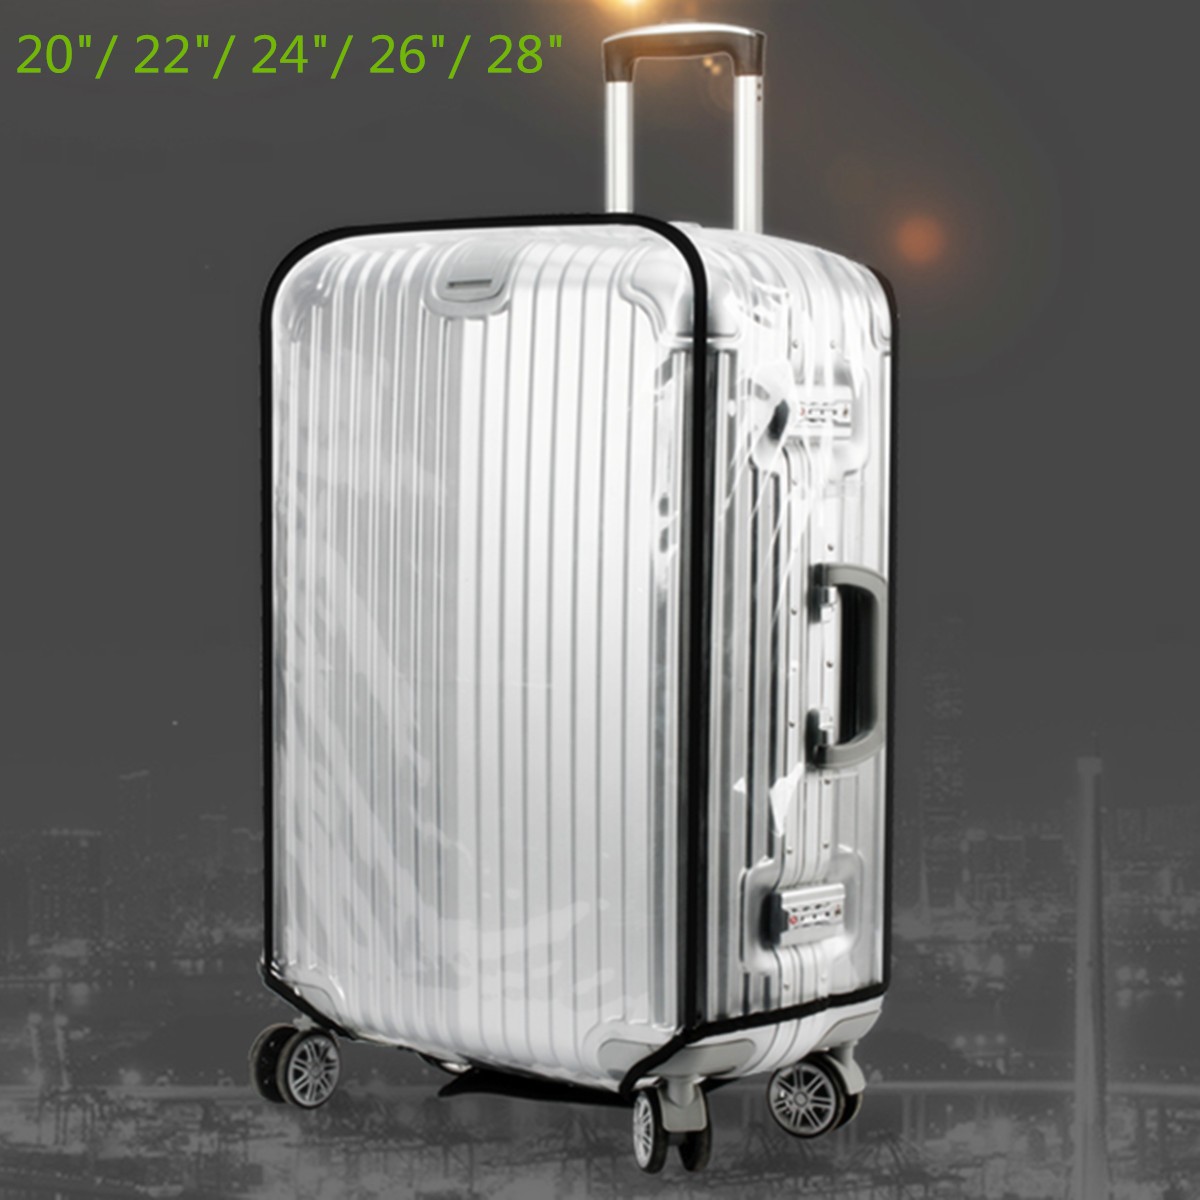 Universal-Waterproof-Transparent-Protective-Luggage-Cover-Suitcase-Case-Travel-1299799